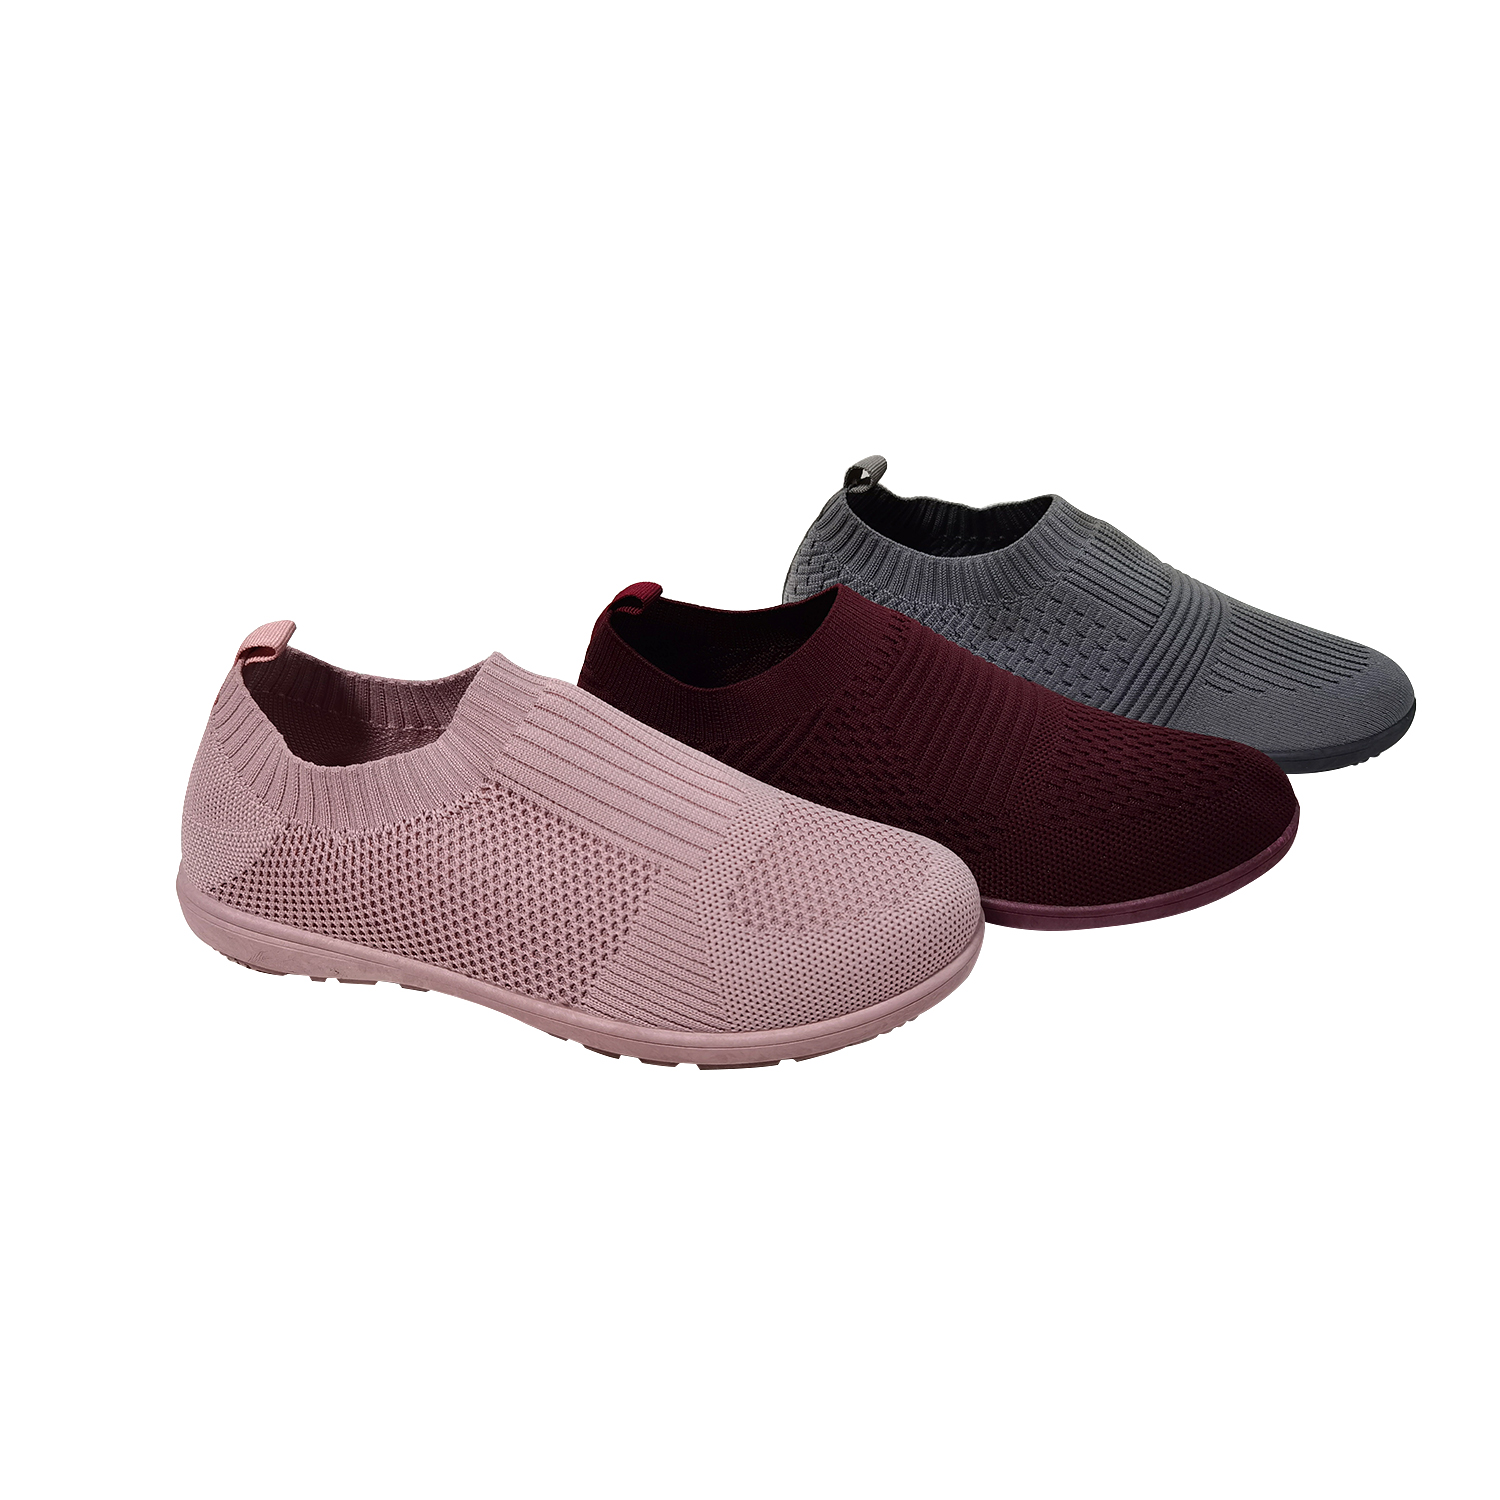 Top 10 Children's Ballet Shoes for Dancing Enthusiasts